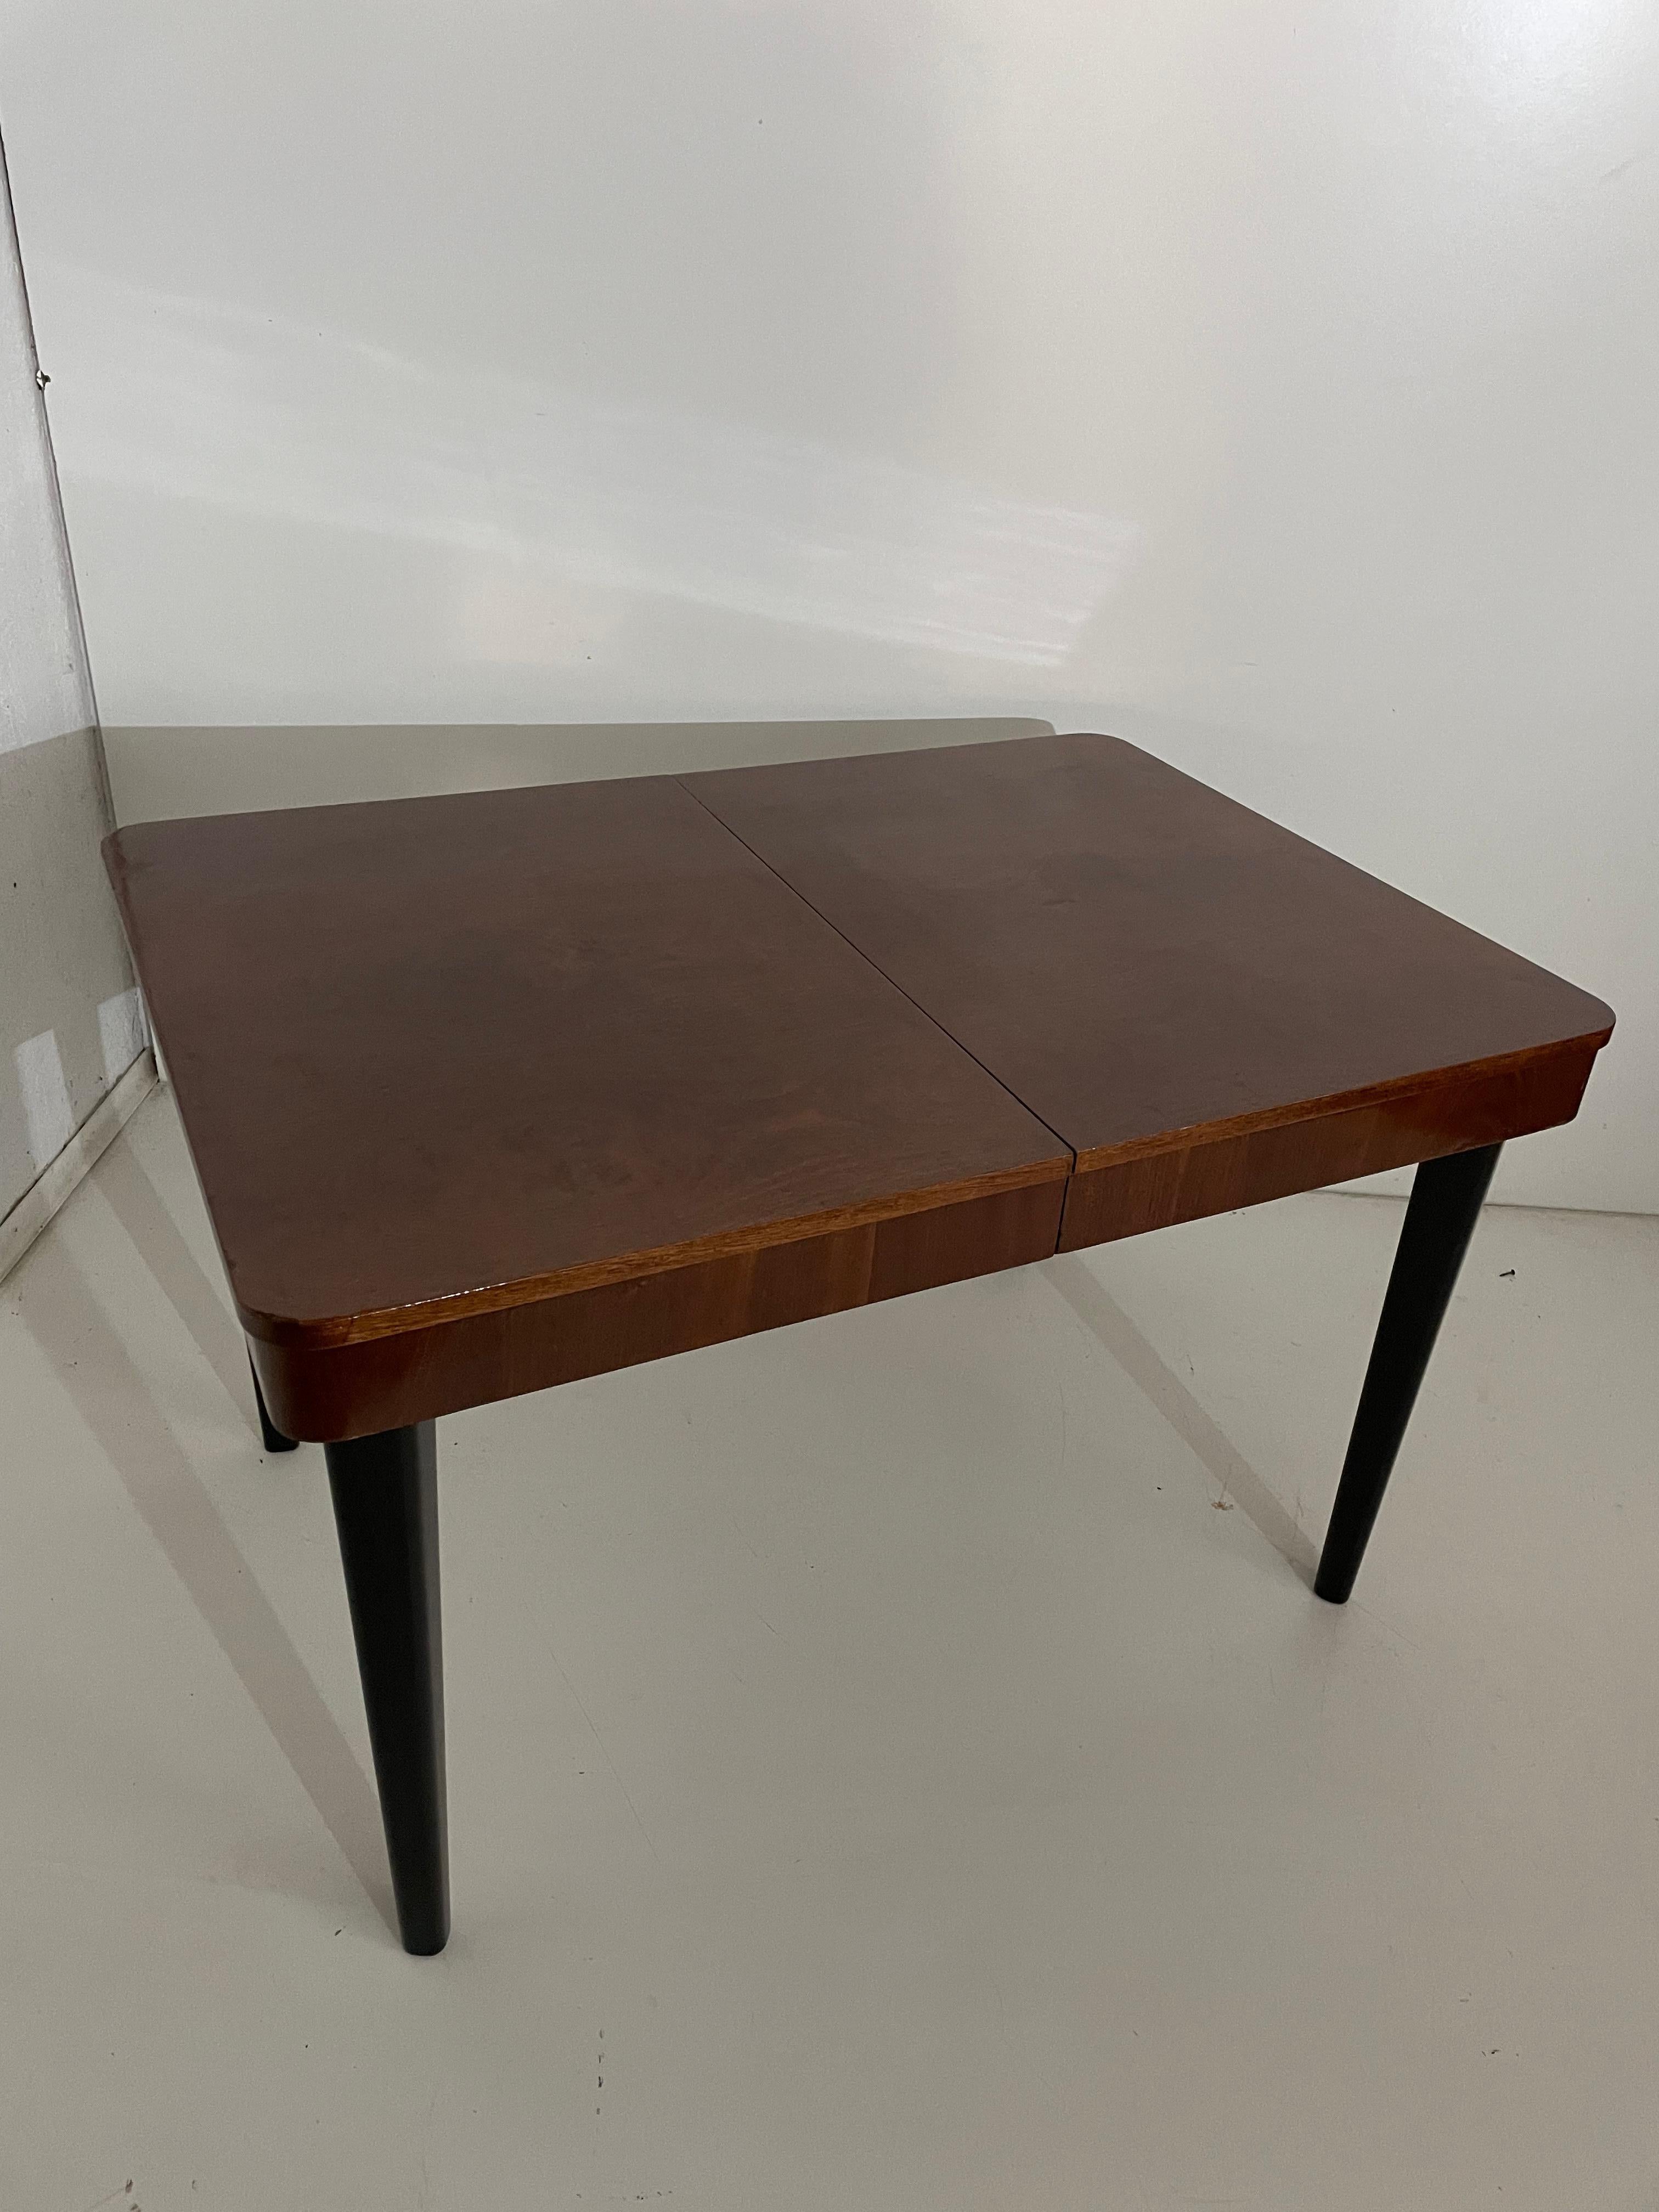 Art Deco table by J. Halabala from 1940s.

Art Deco table by the famous Czech designer J. Halabala, 1940. Jindrich Halabala, (a Czech designer ranked among the most outstanding creators of the modern period. The peak of his career fell on the